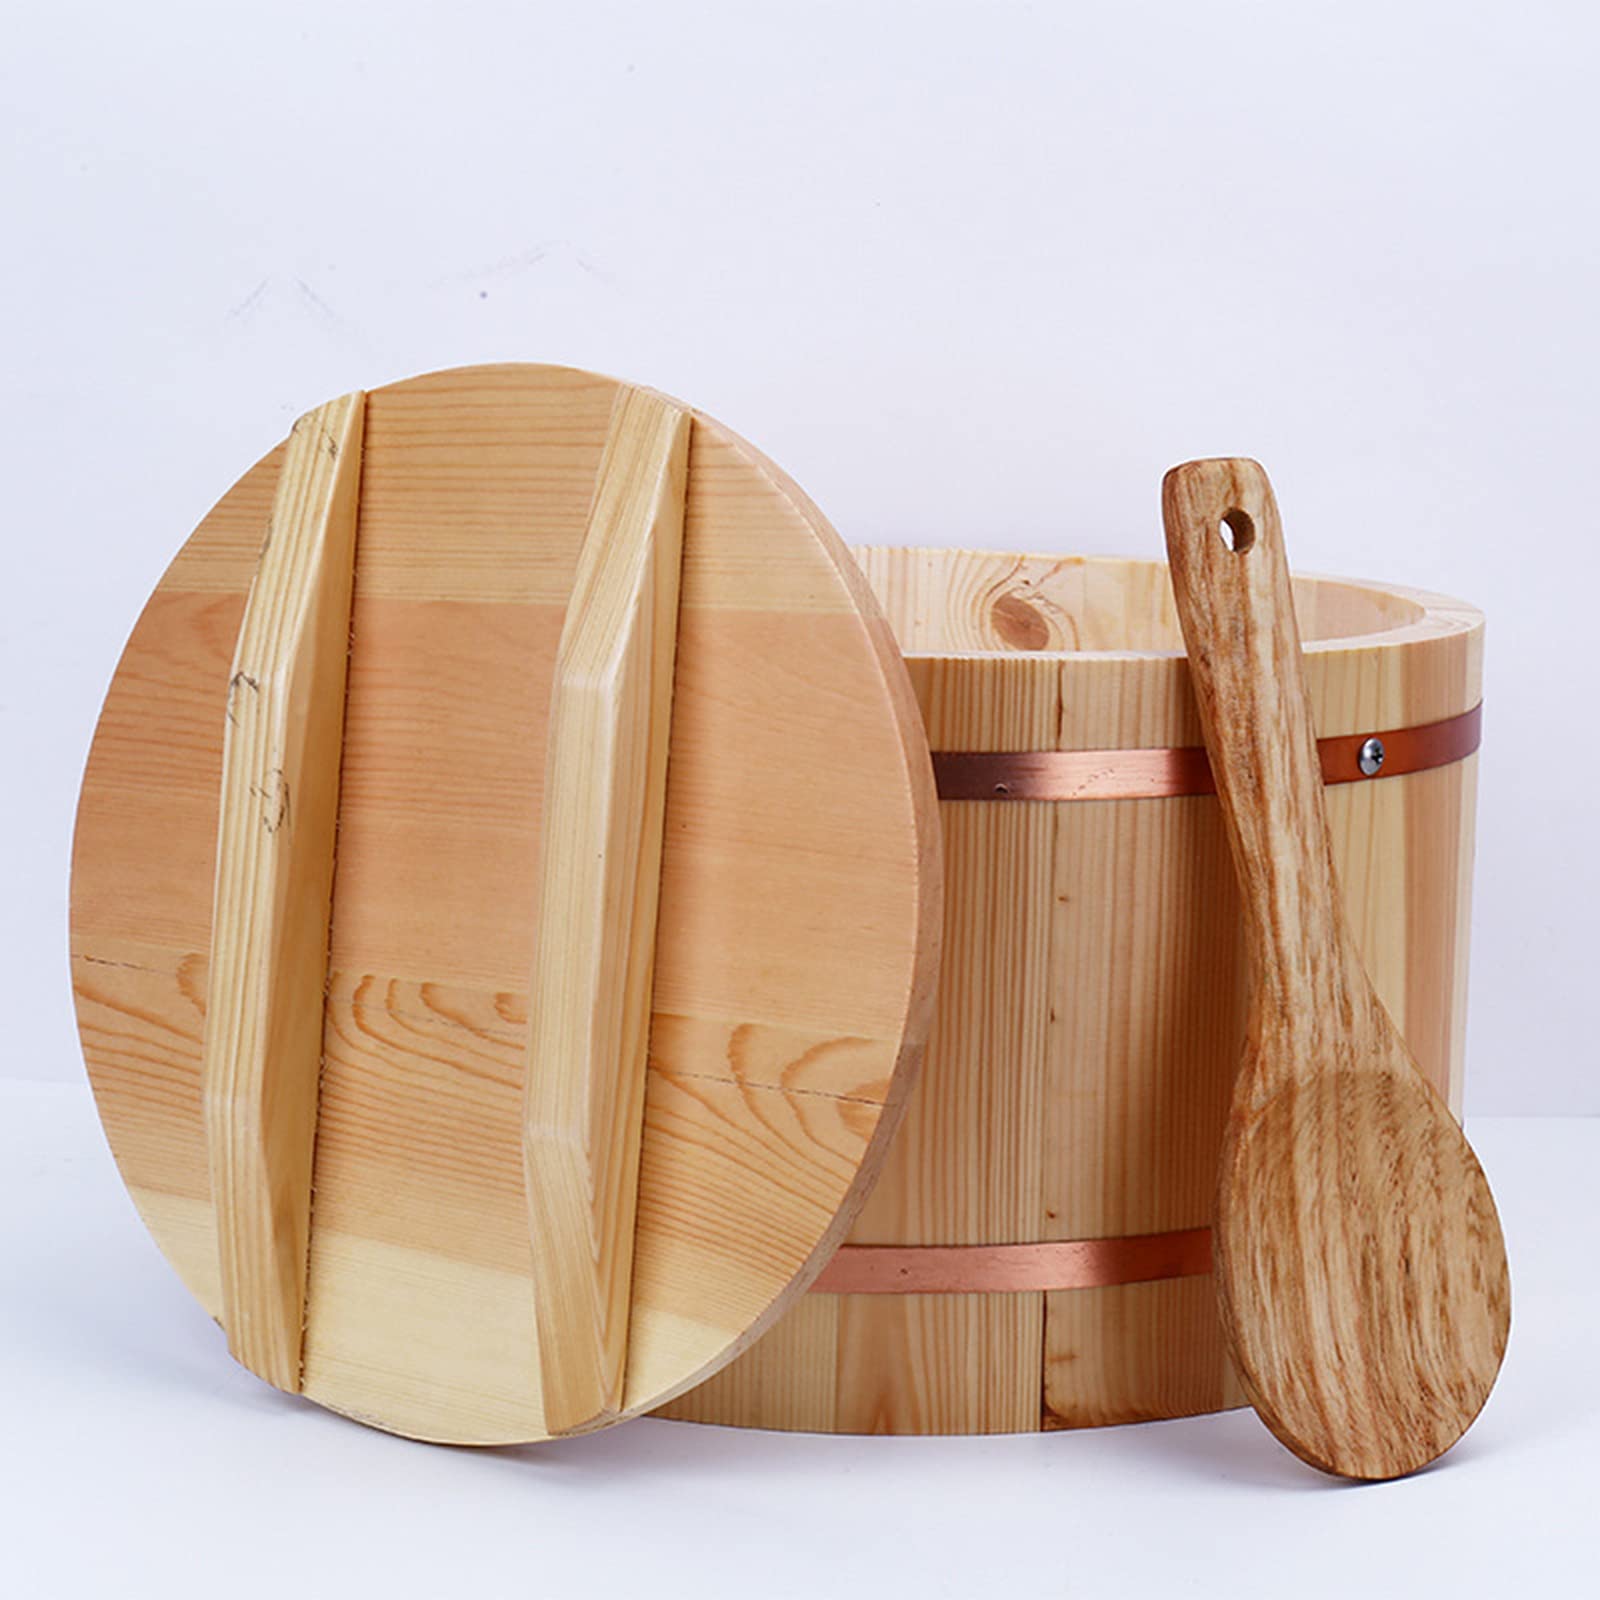 AIZYR Wooden Sushi Rice Bowl with Lid and Rice Scoop, Japanese Hangiri Sushi Oke Rice Mixing Tub for Sushi Restaurant Home Use,24cm